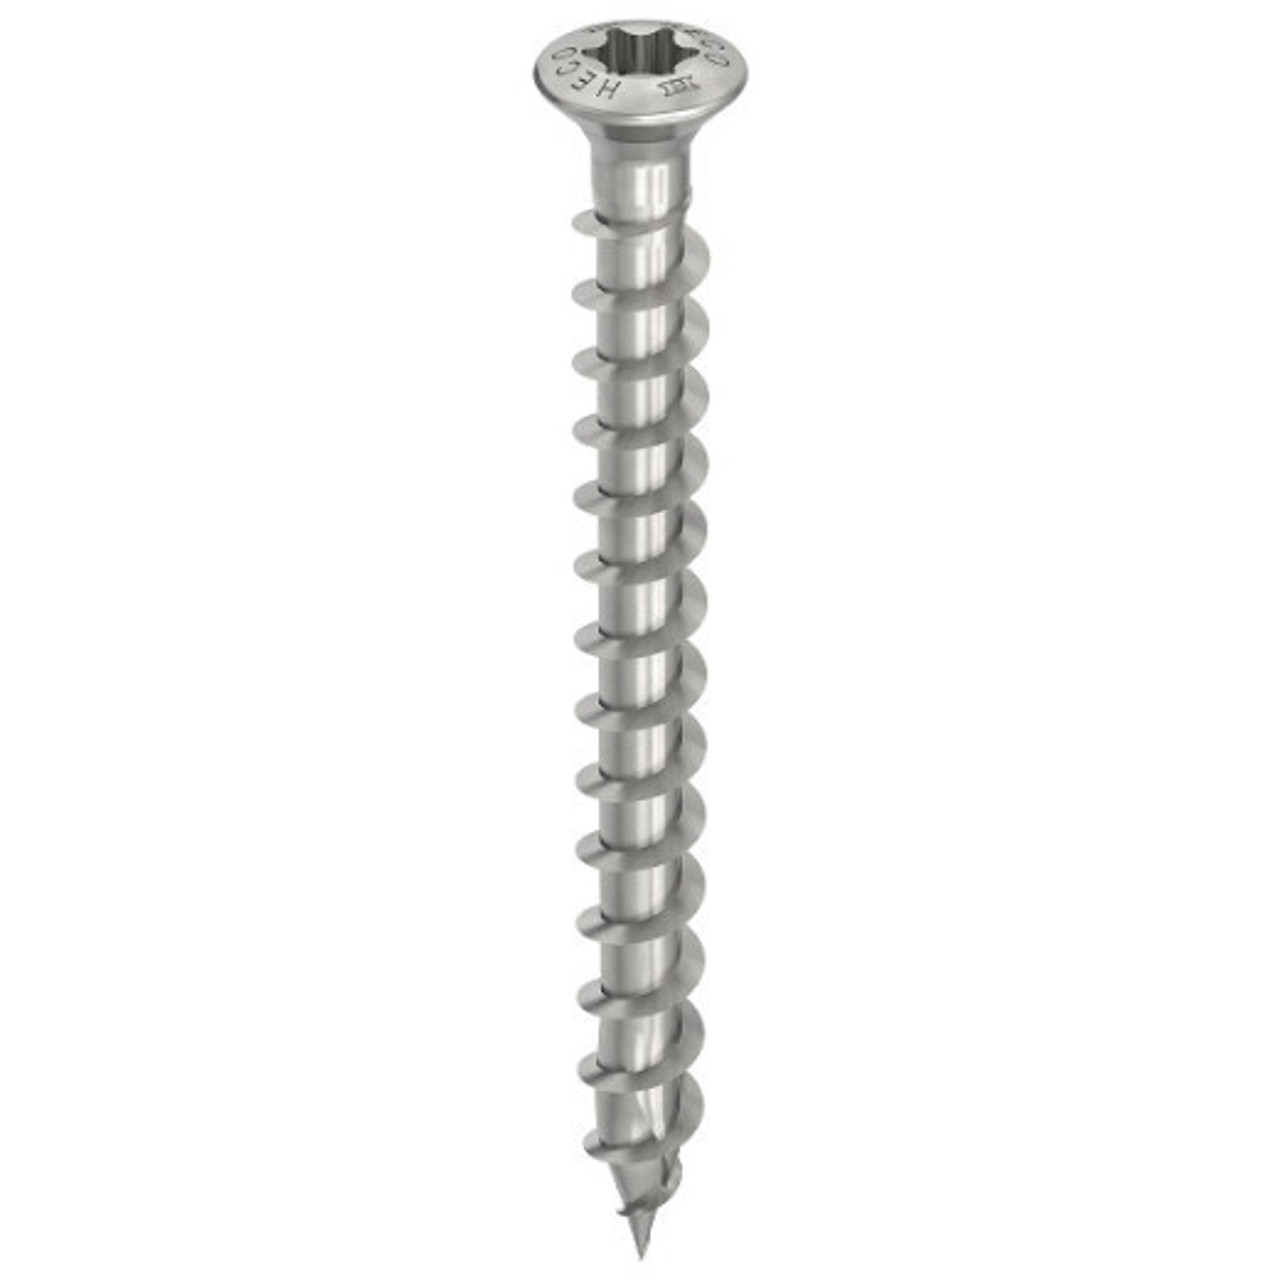 HECO Raised Countersunk Head Screws | Buy Online 3.5mm Raised Countersunk Head Screws for Hardwood Cladding and Timber Battens with HD20 Drive